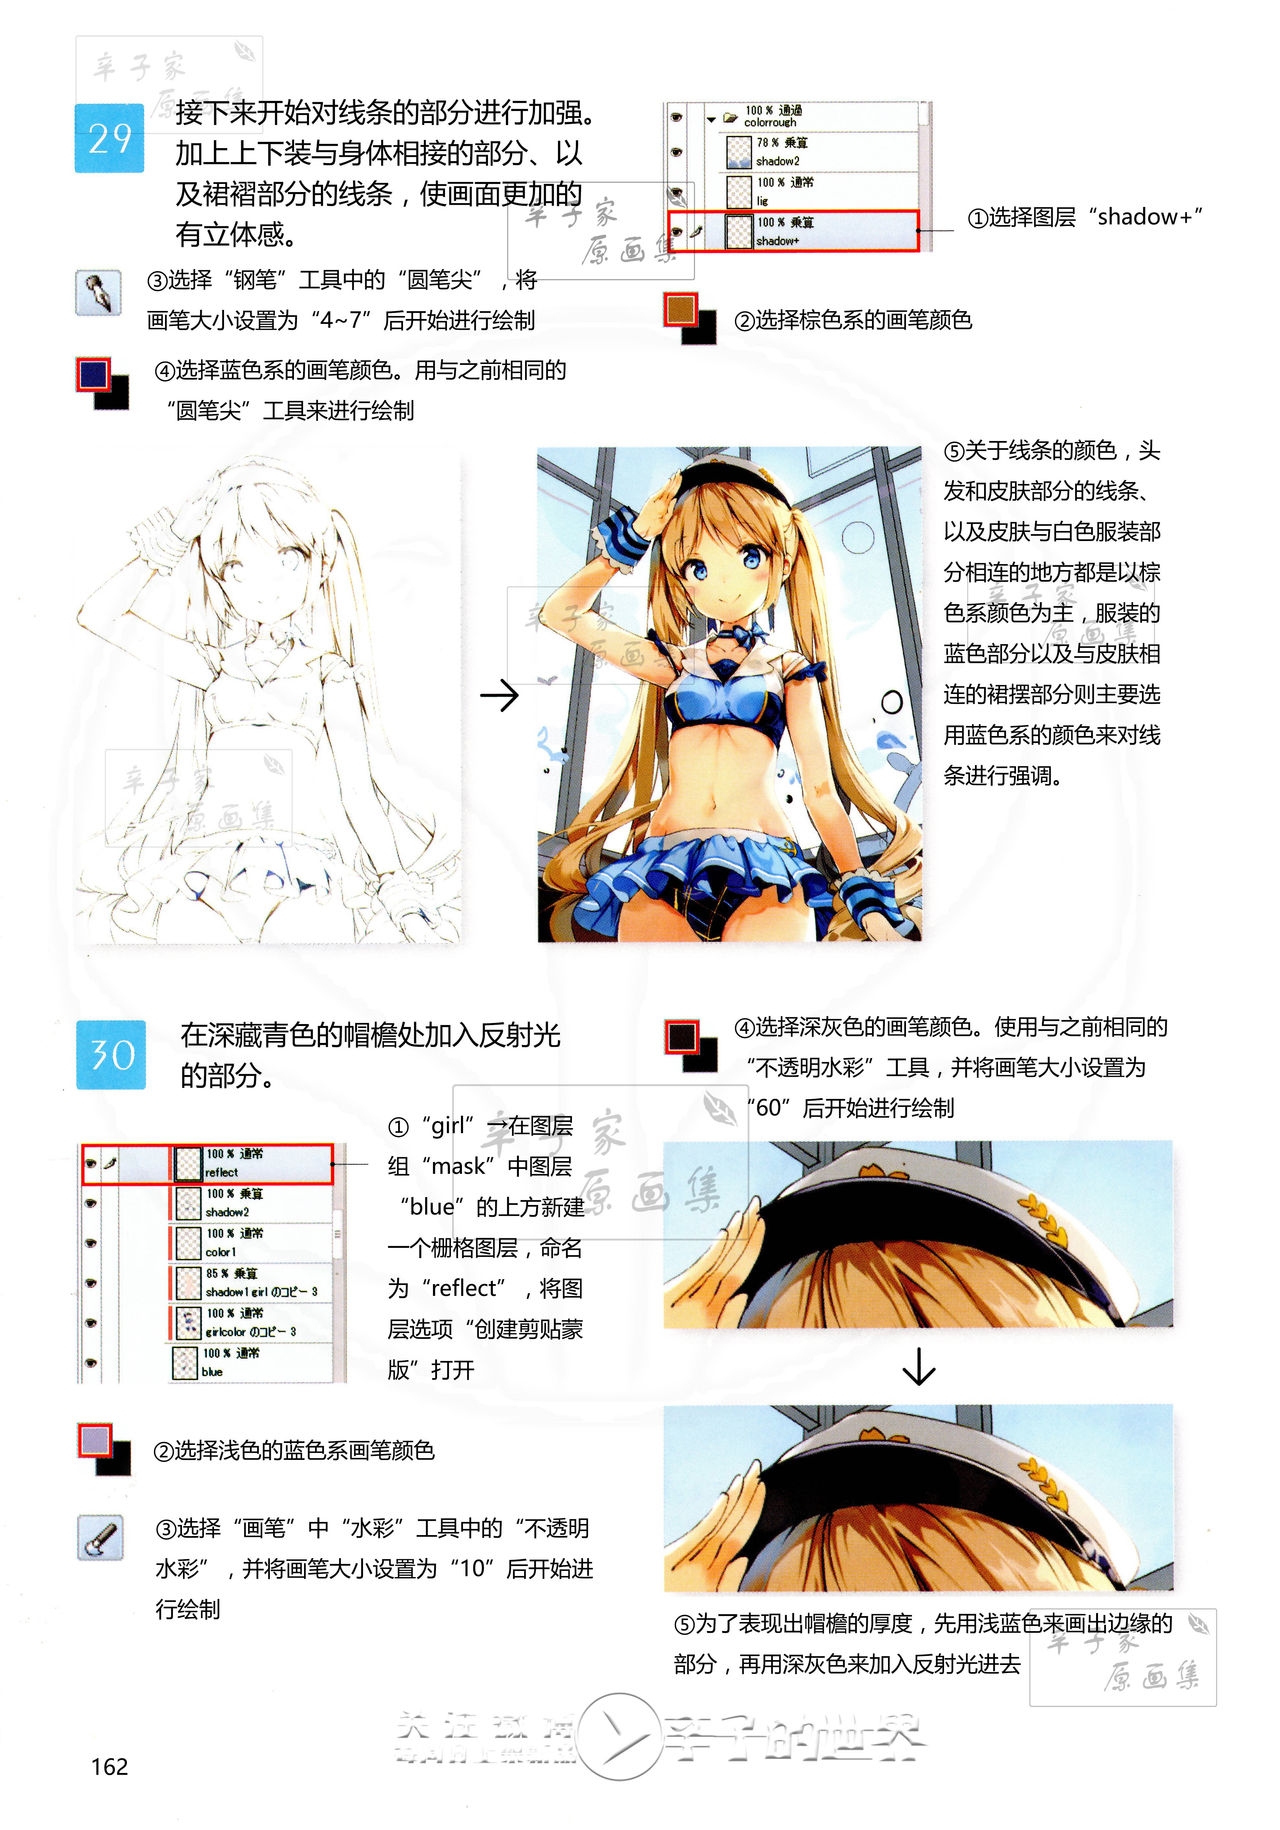 [Anmi] Lets Make ★ Character CG illustration techniques vol.9 [Chinese] 160